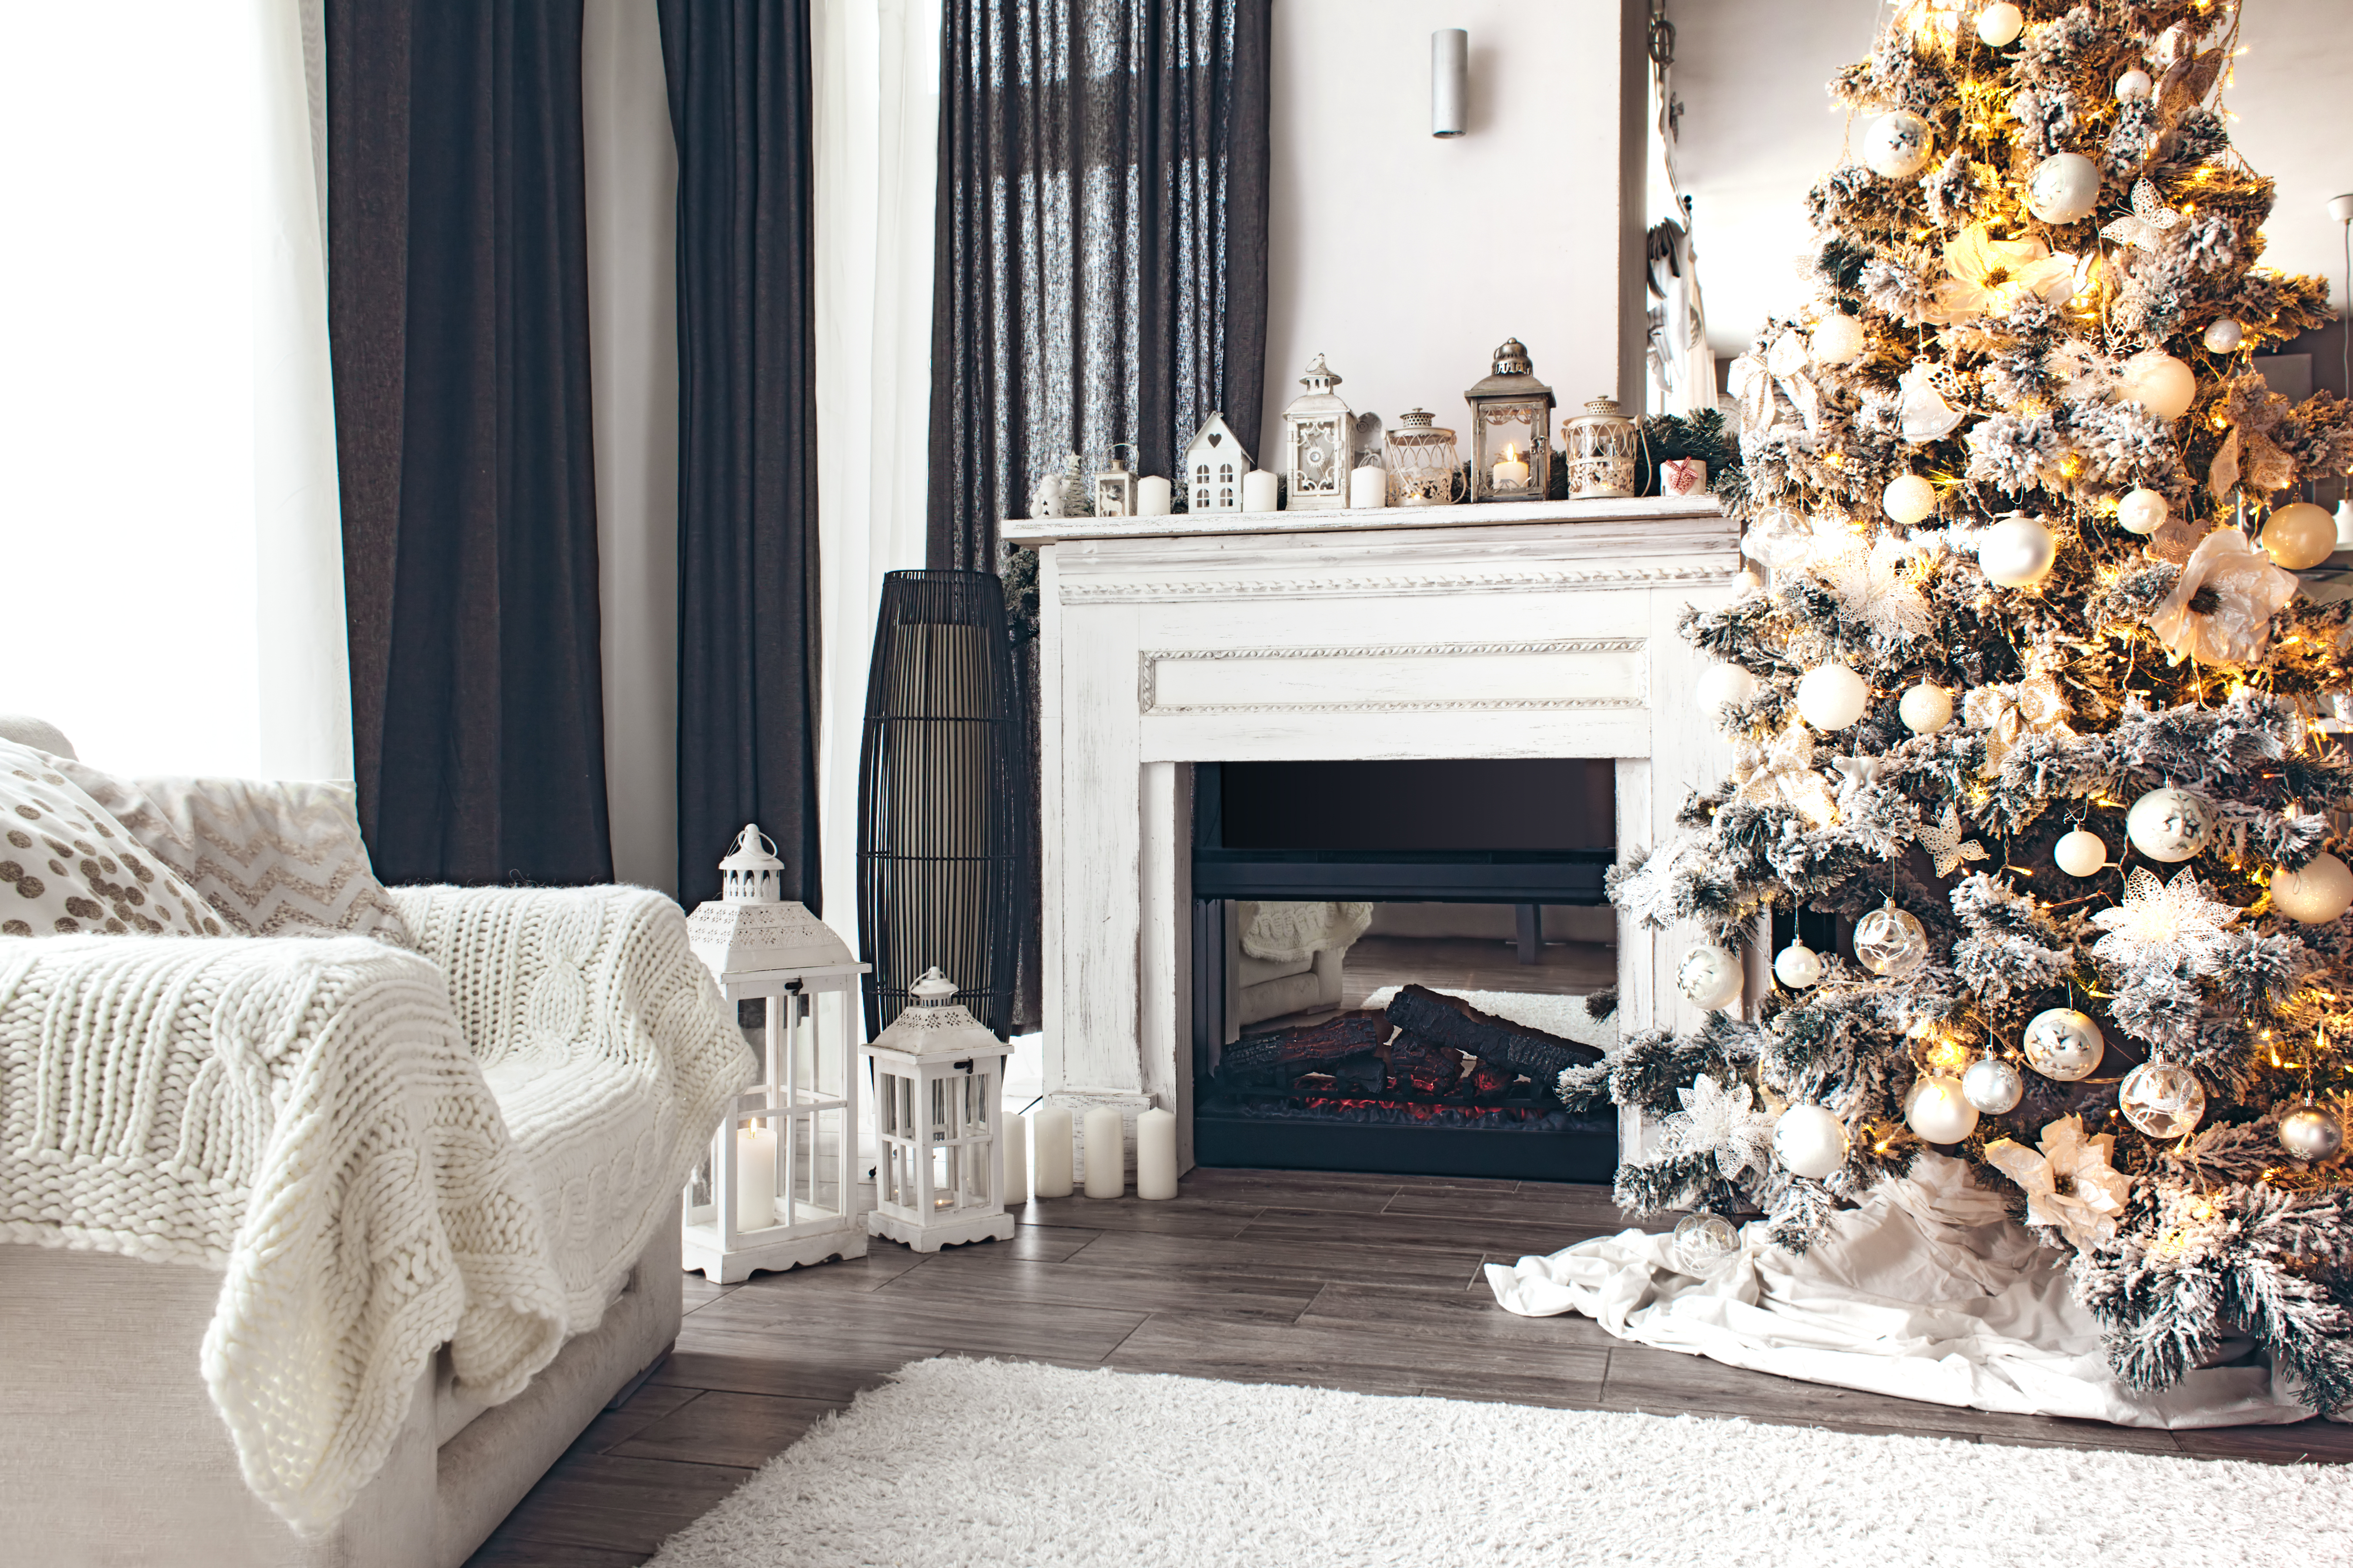 Smart Tips From Experts For Packing & Organizing Decorations After The Holidays 2